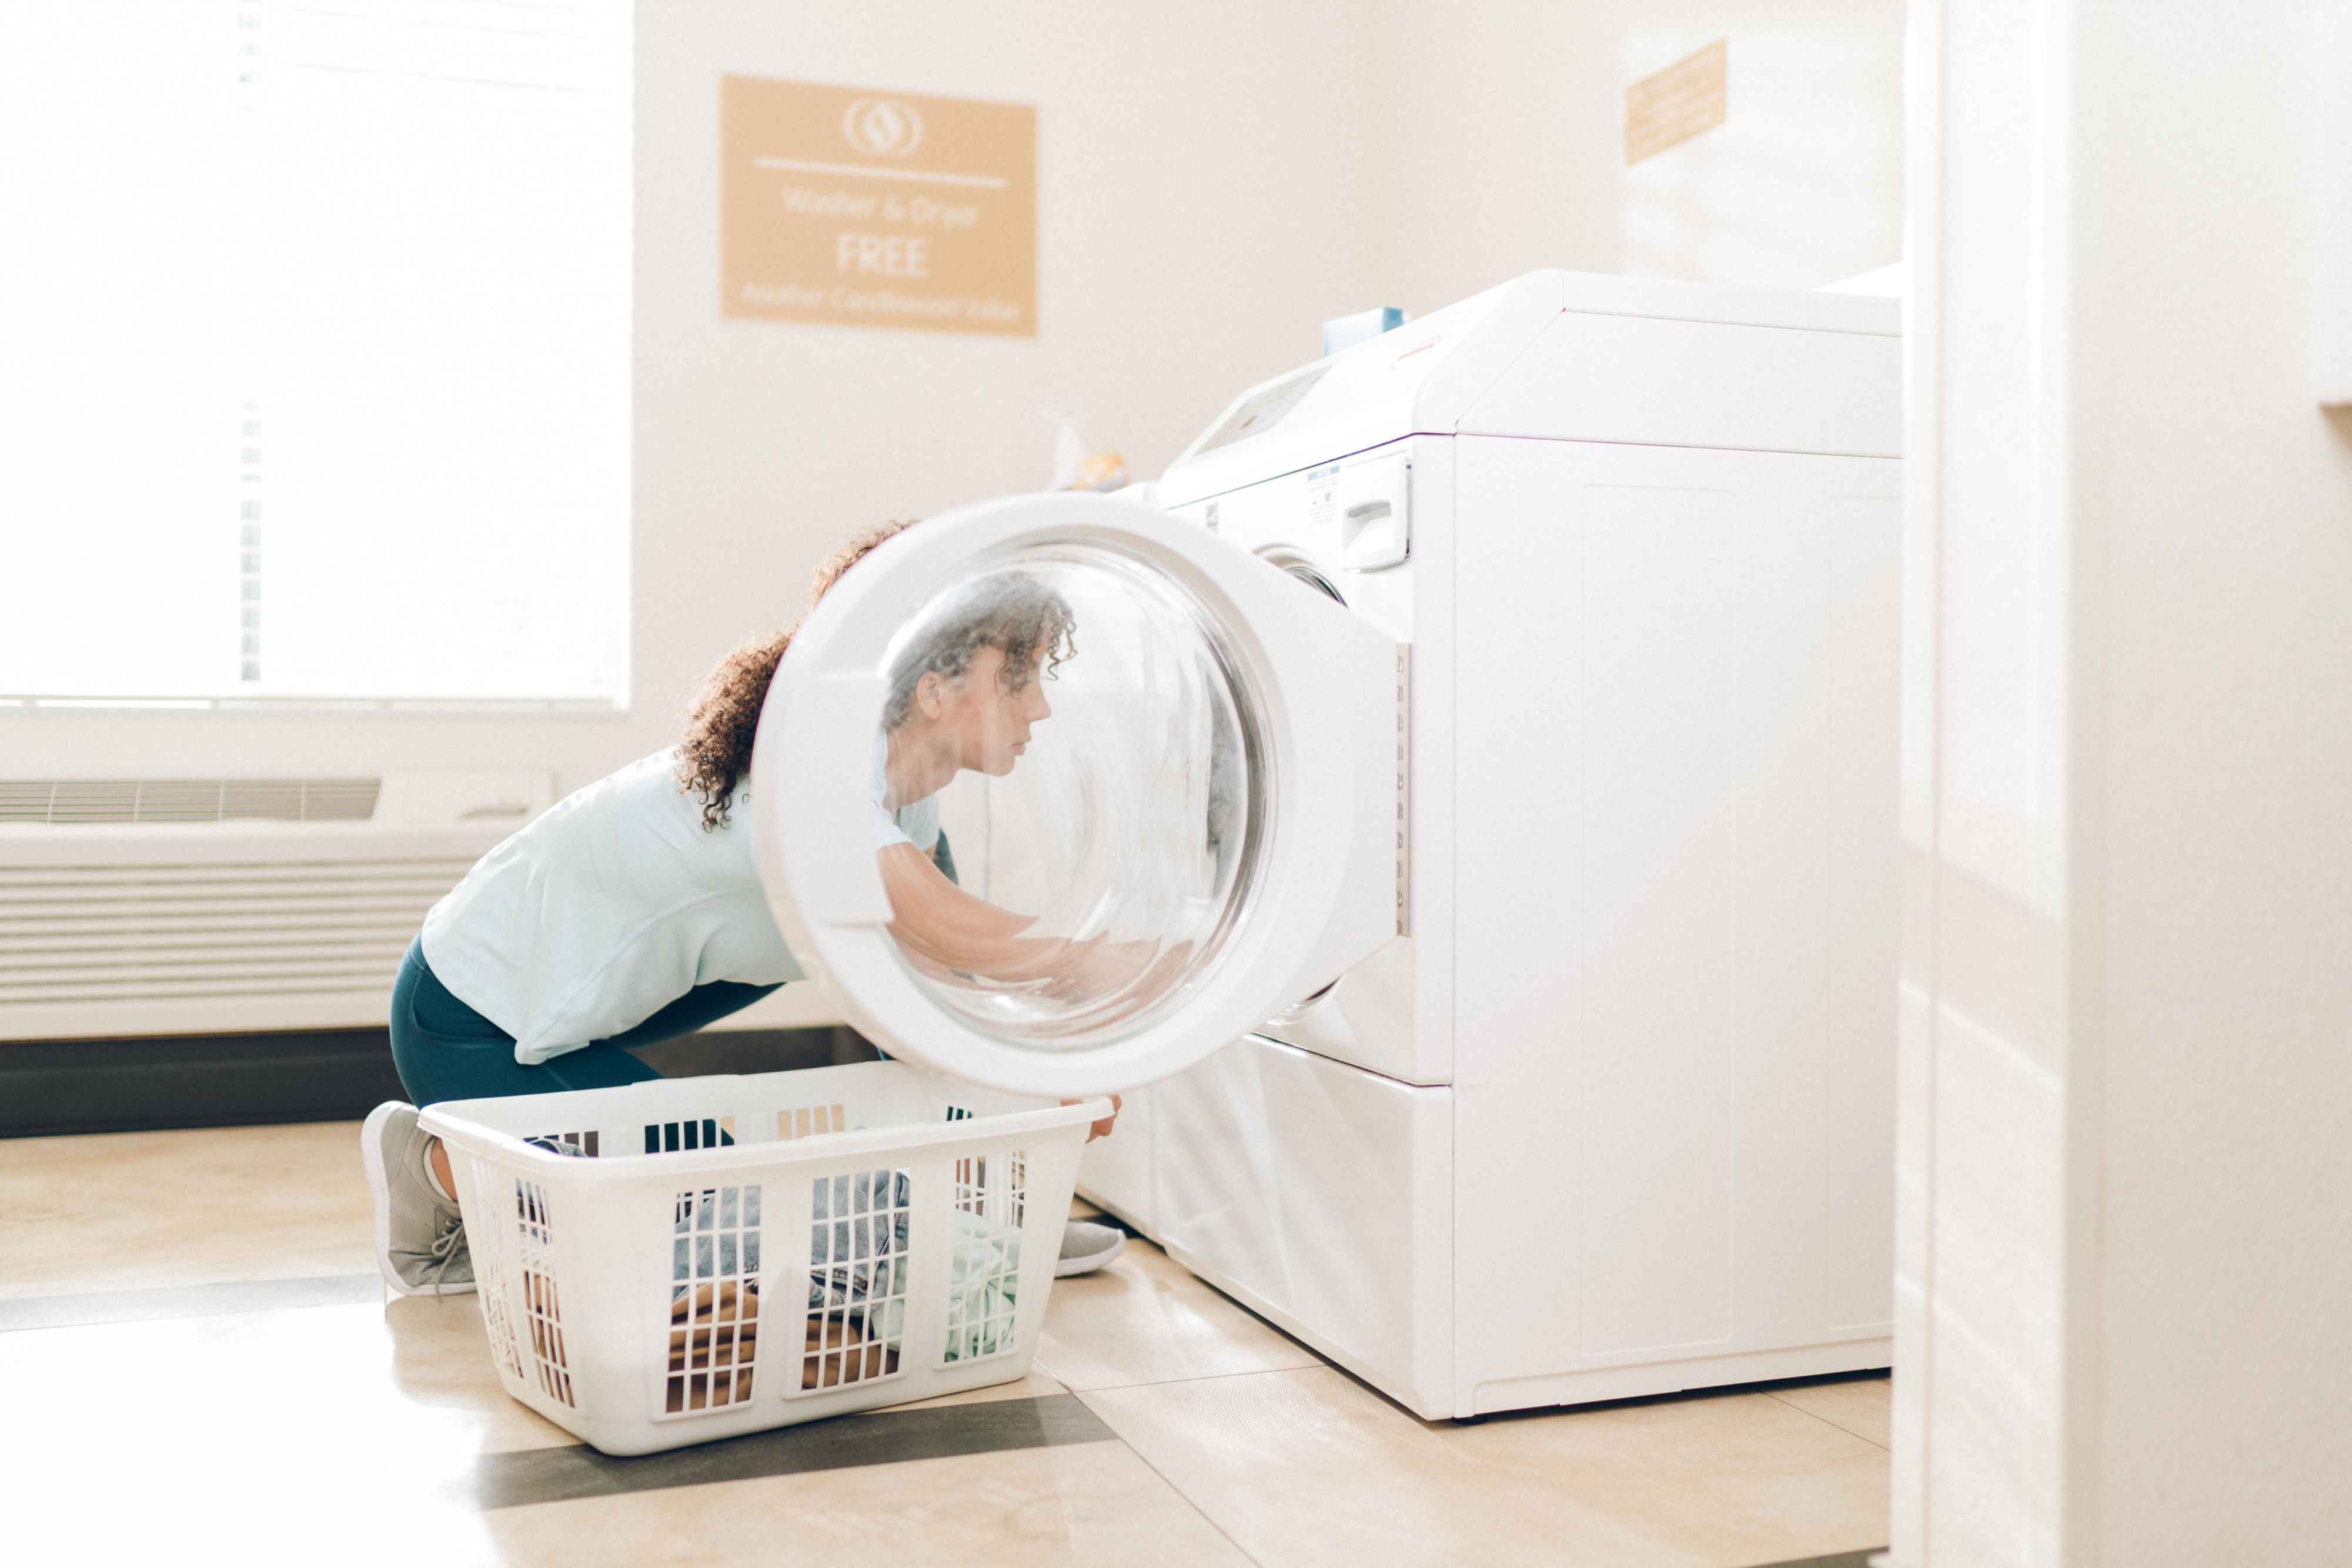 You can save your quarters for something else as our 24/7 laundry room is complimentary to our Guests. Just provide your own laundry soap, or purchase some from our Pantry.